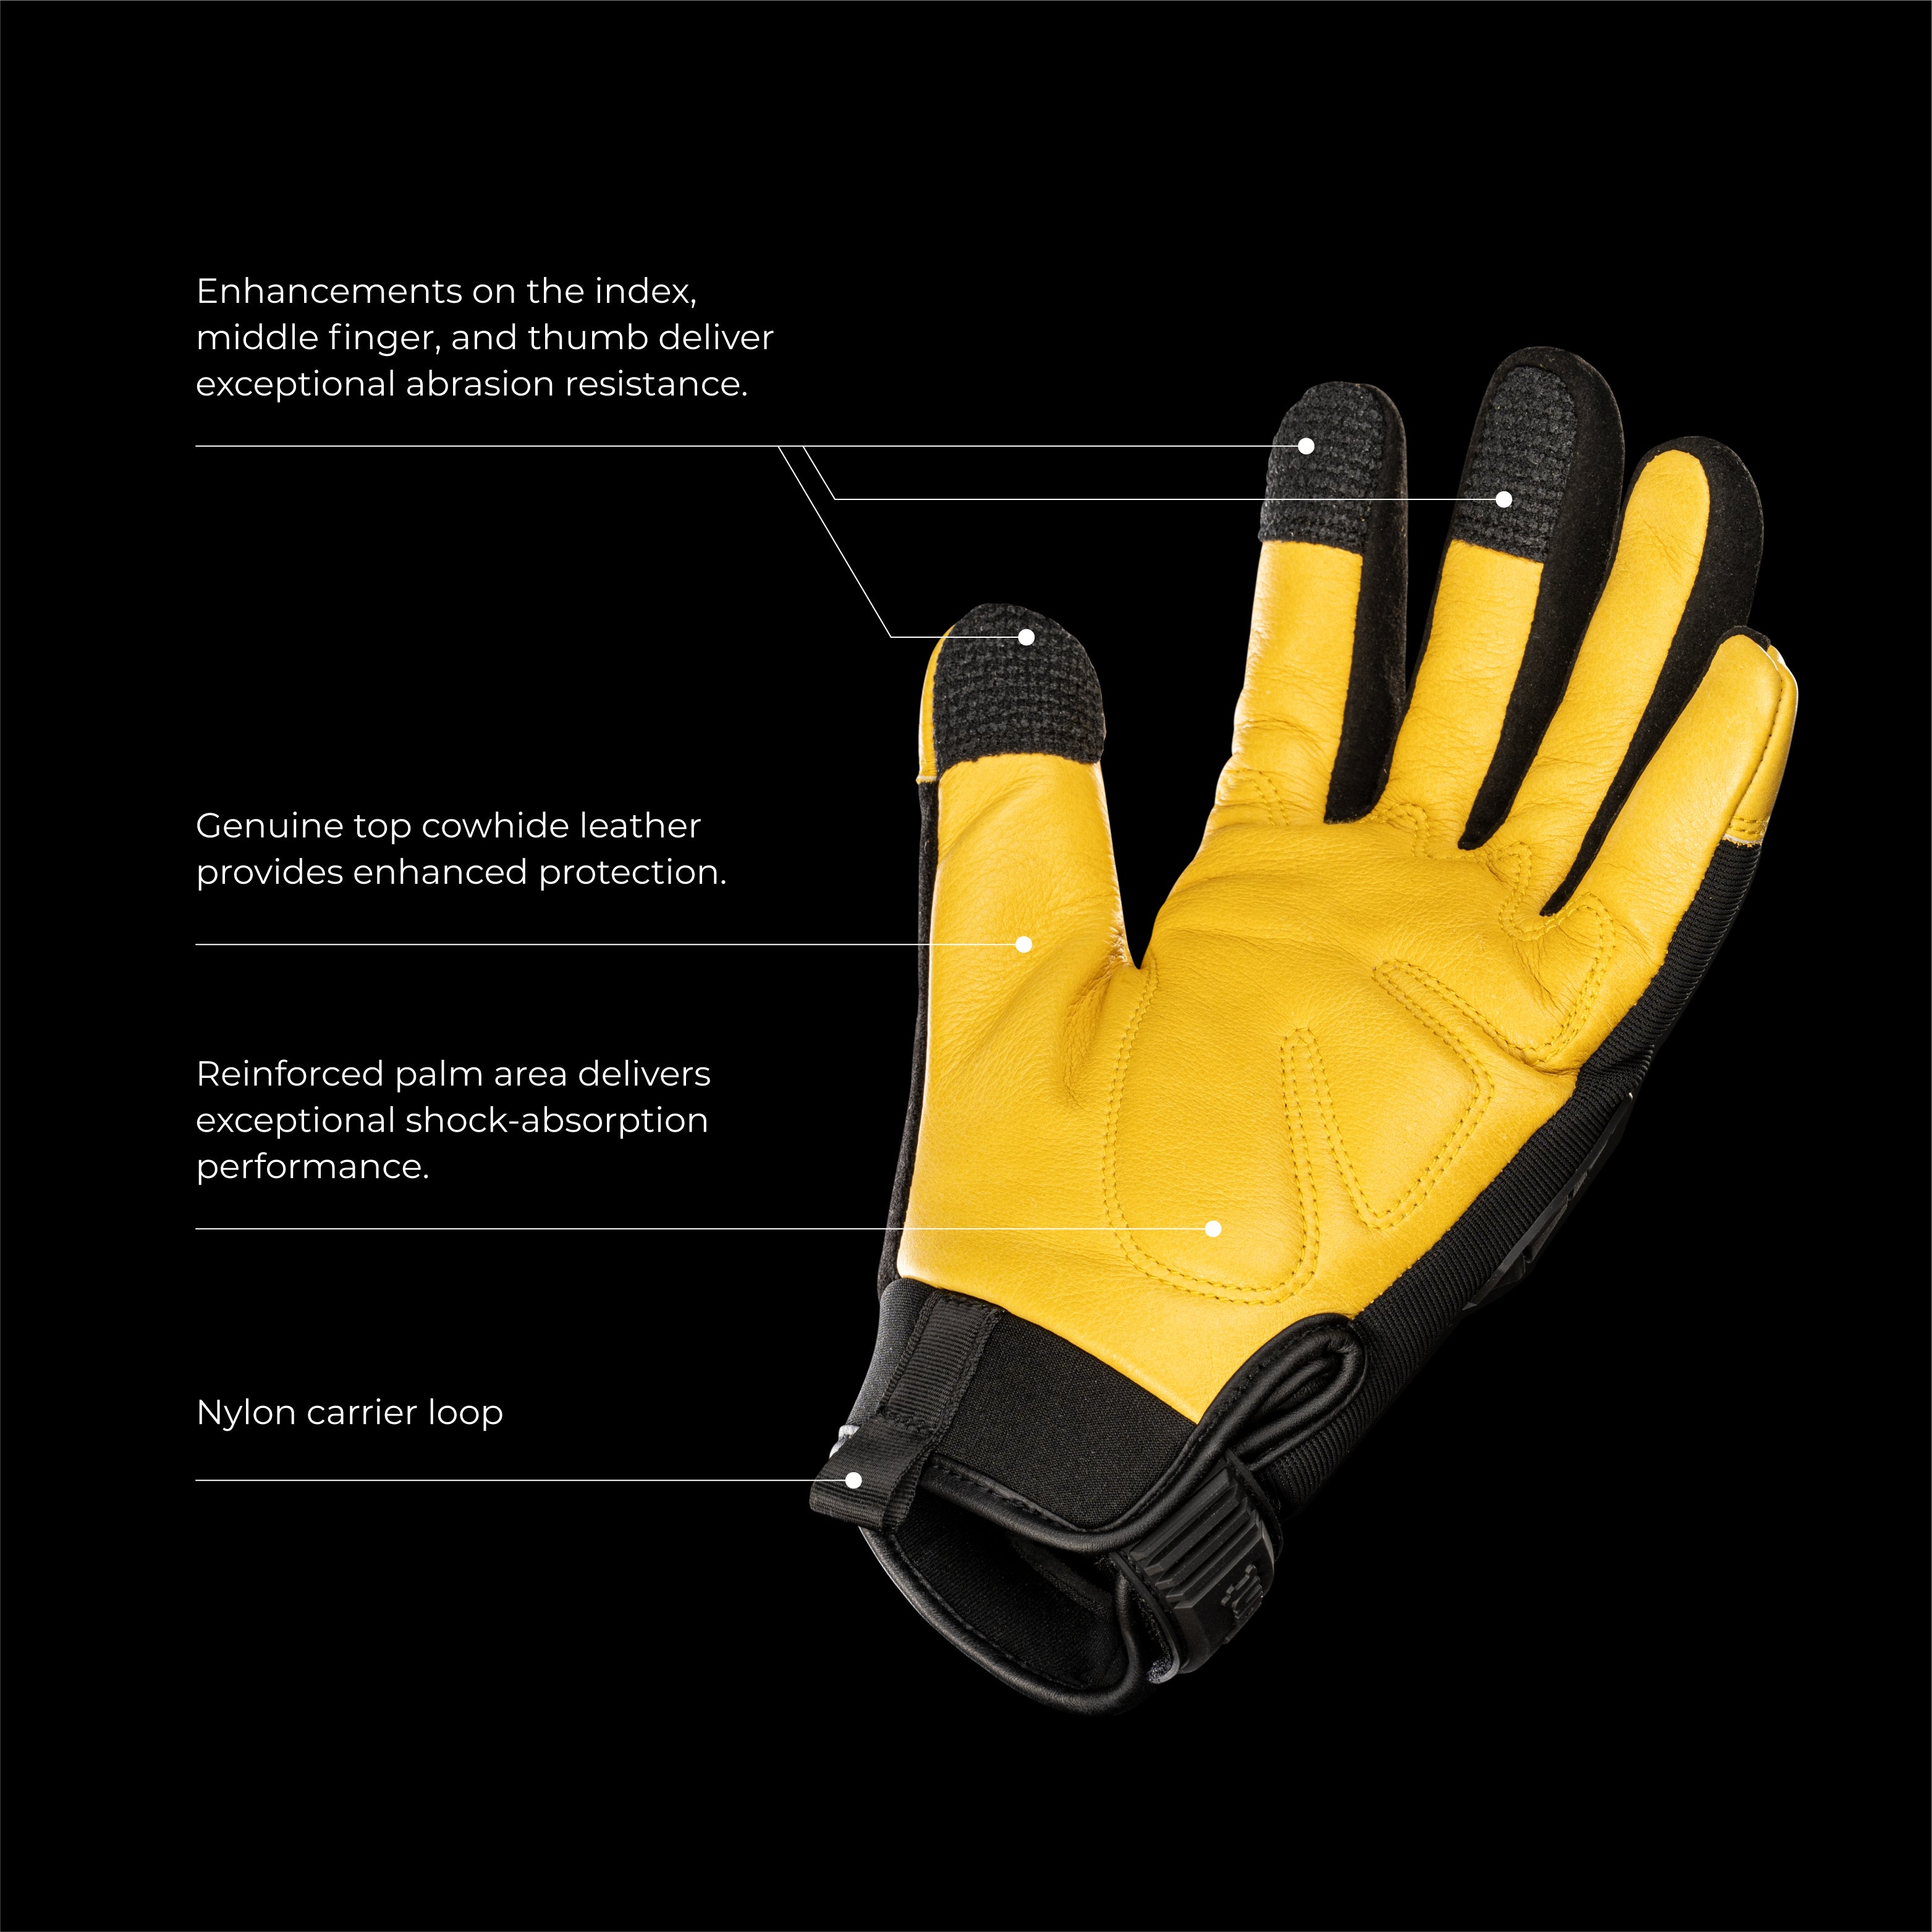 Thor Winter Mechanic Gloves, Heavy Duty, Warm 3M Insulate Lining, Touchscreen, with Impact Protection